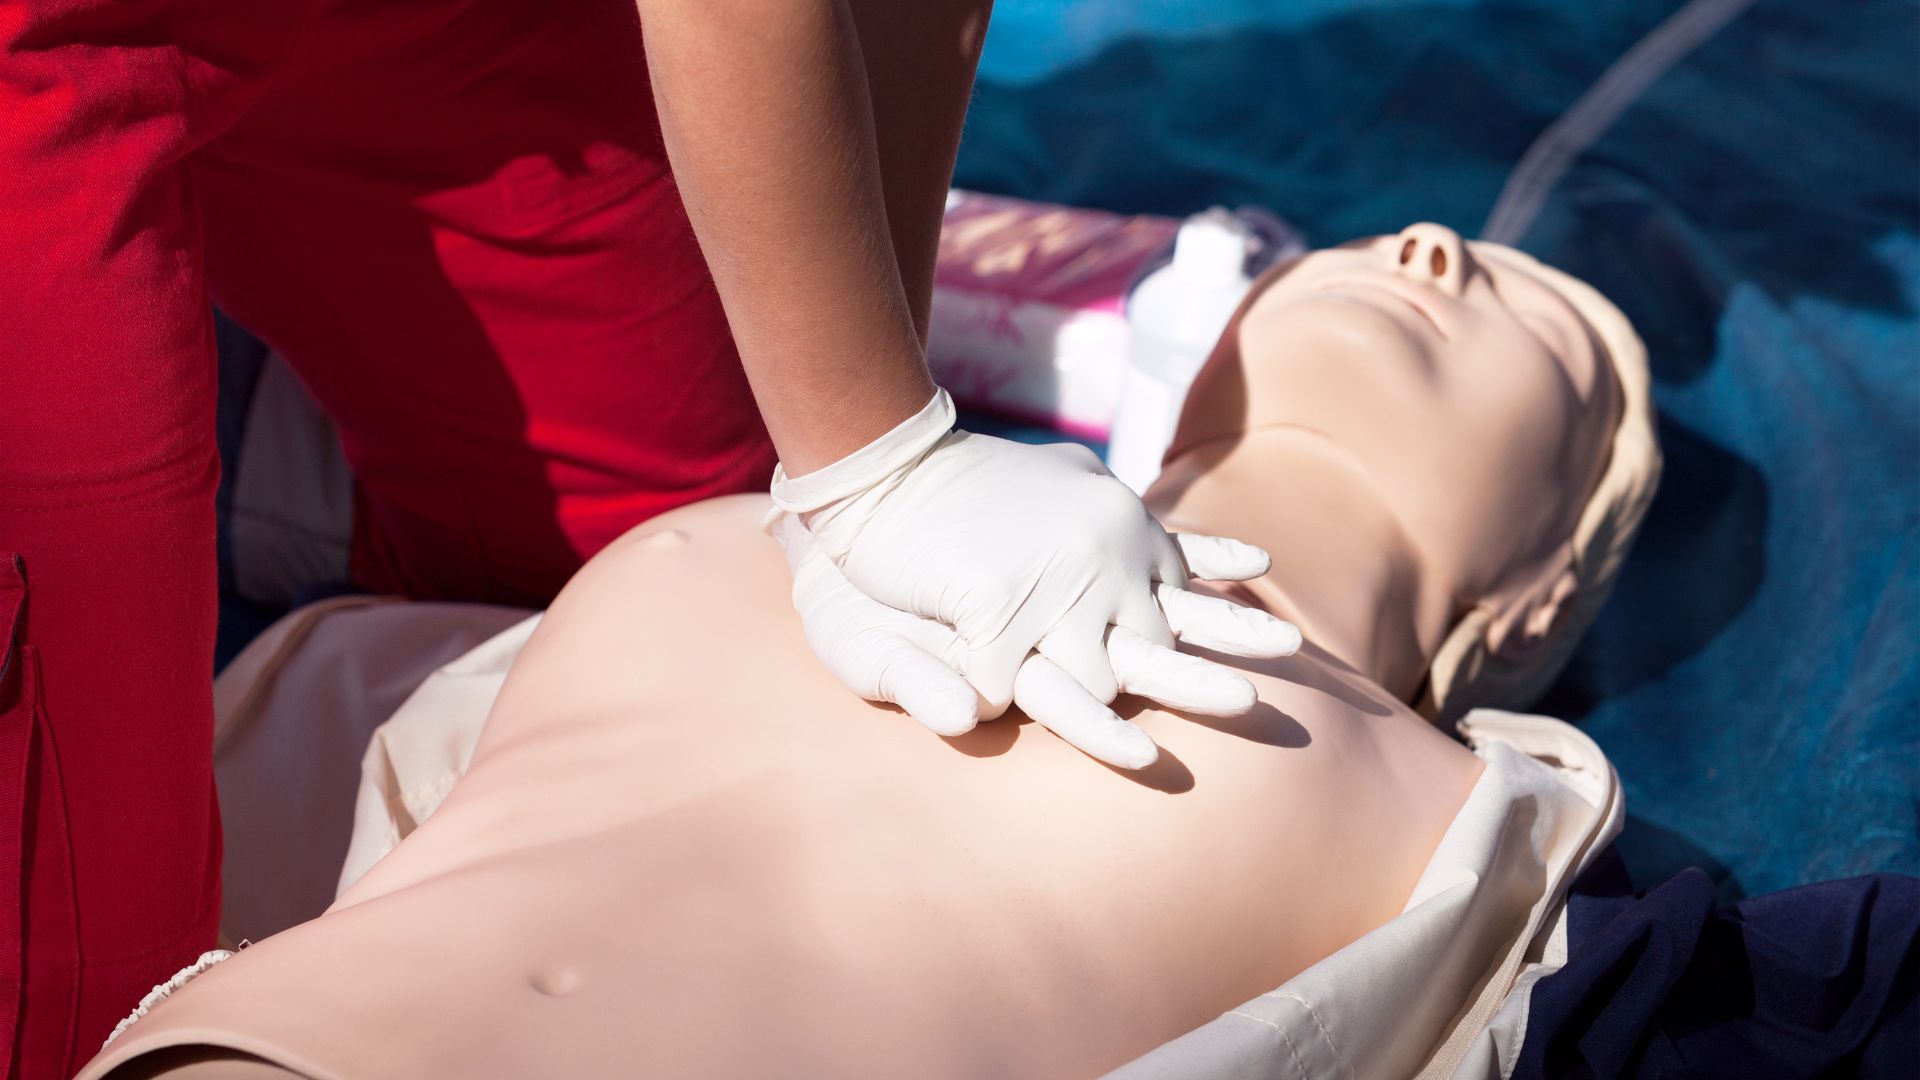 How to stay safe from pathogens when preforming CPR